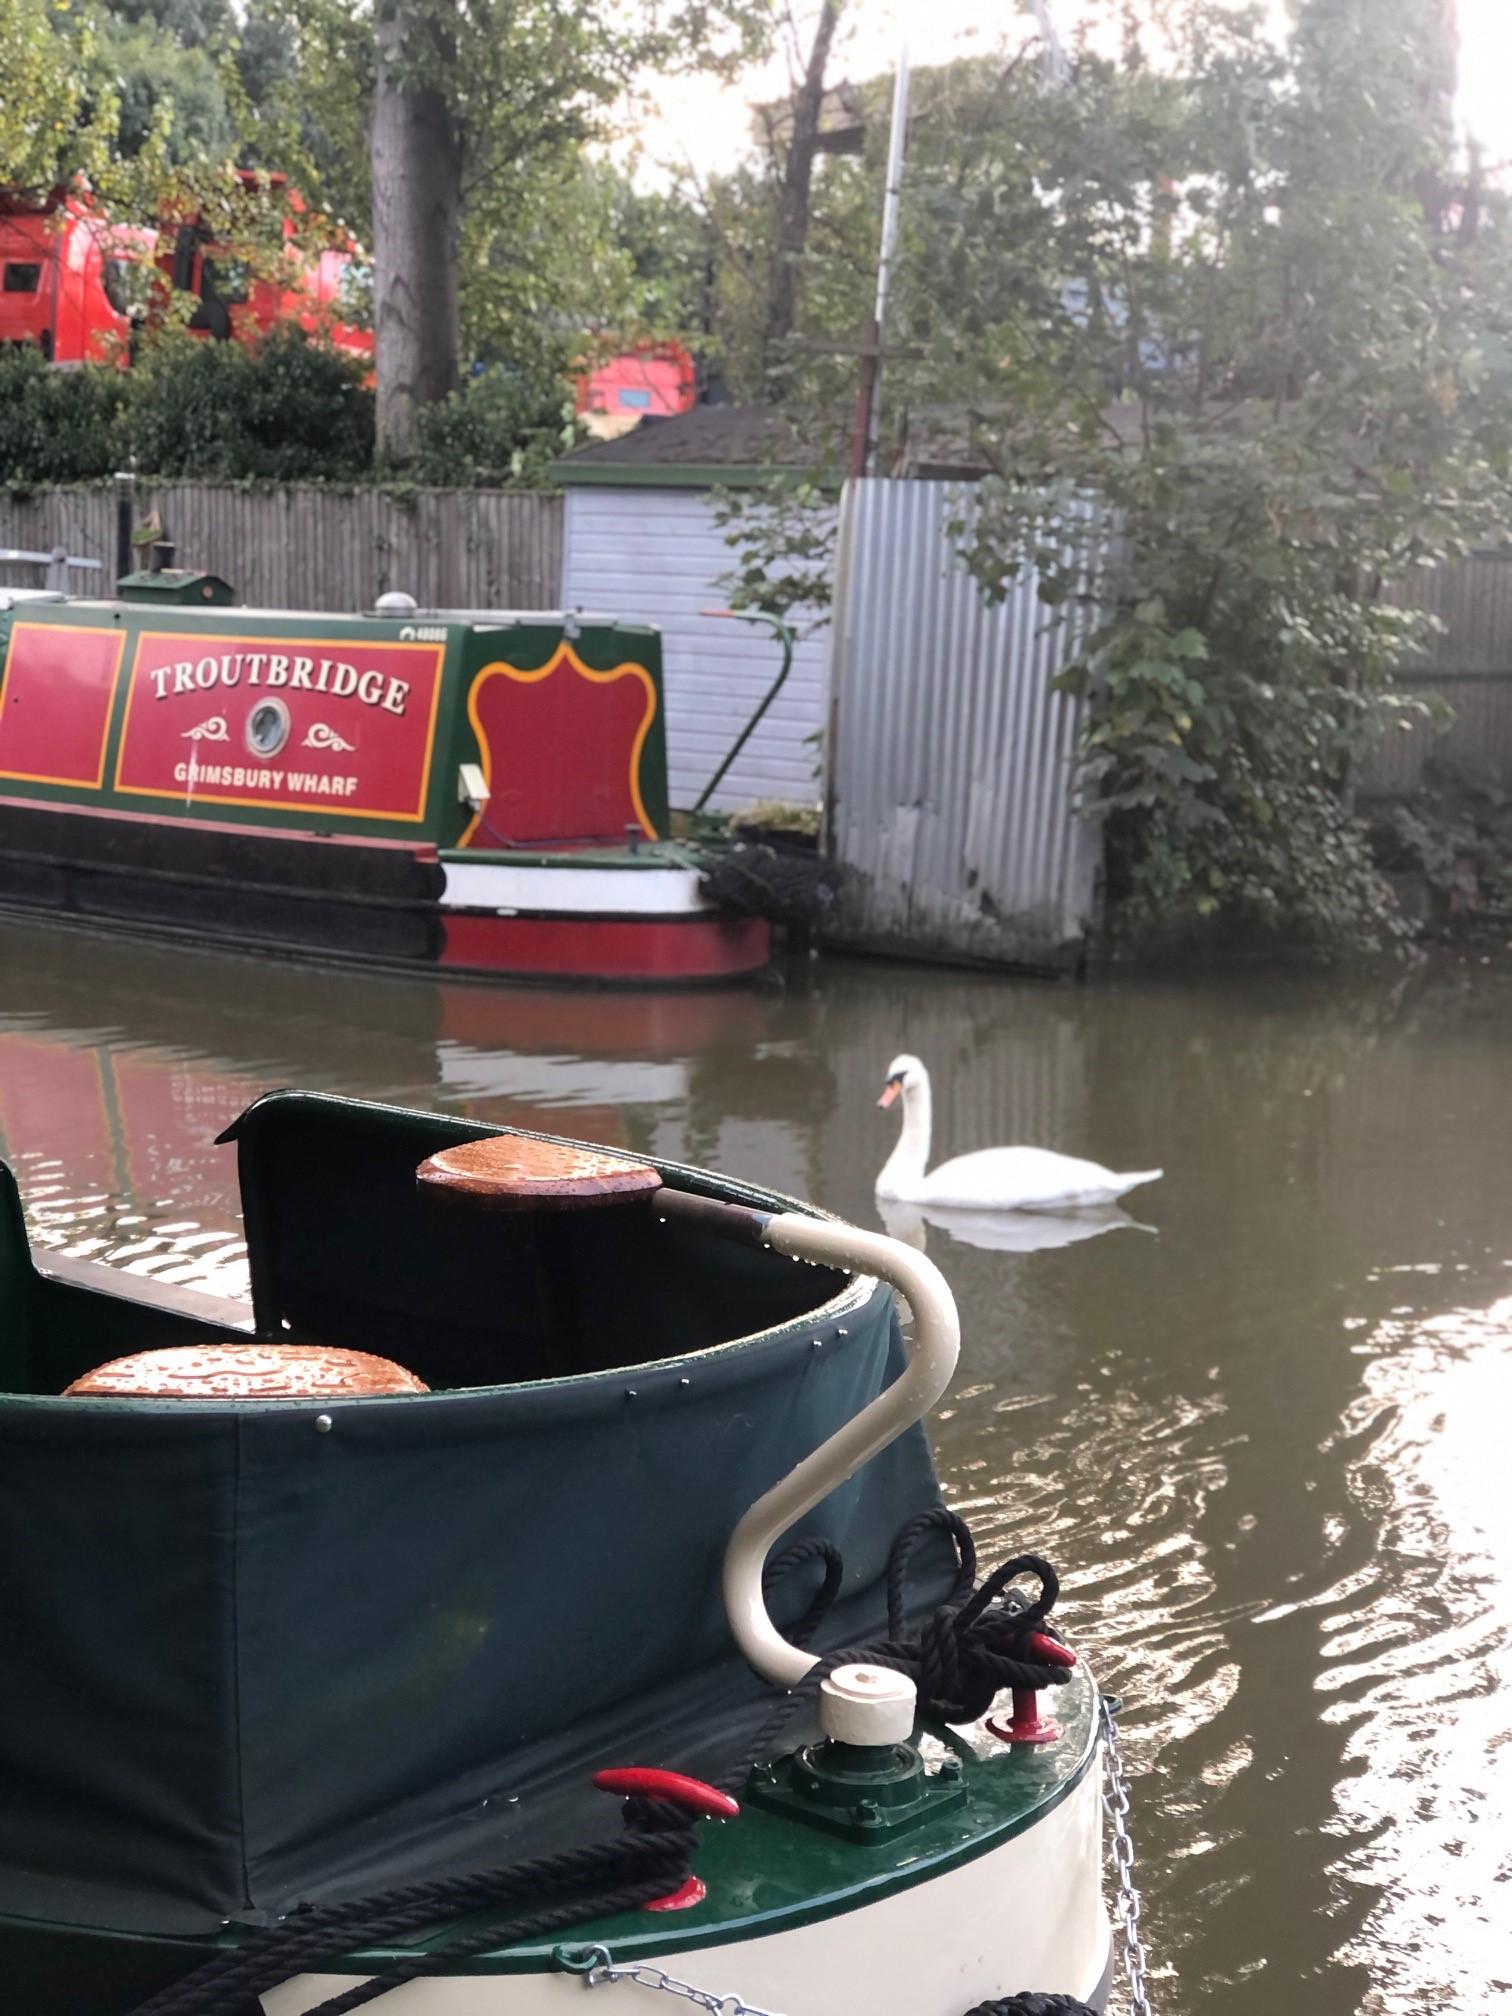 Swan on canal with barges